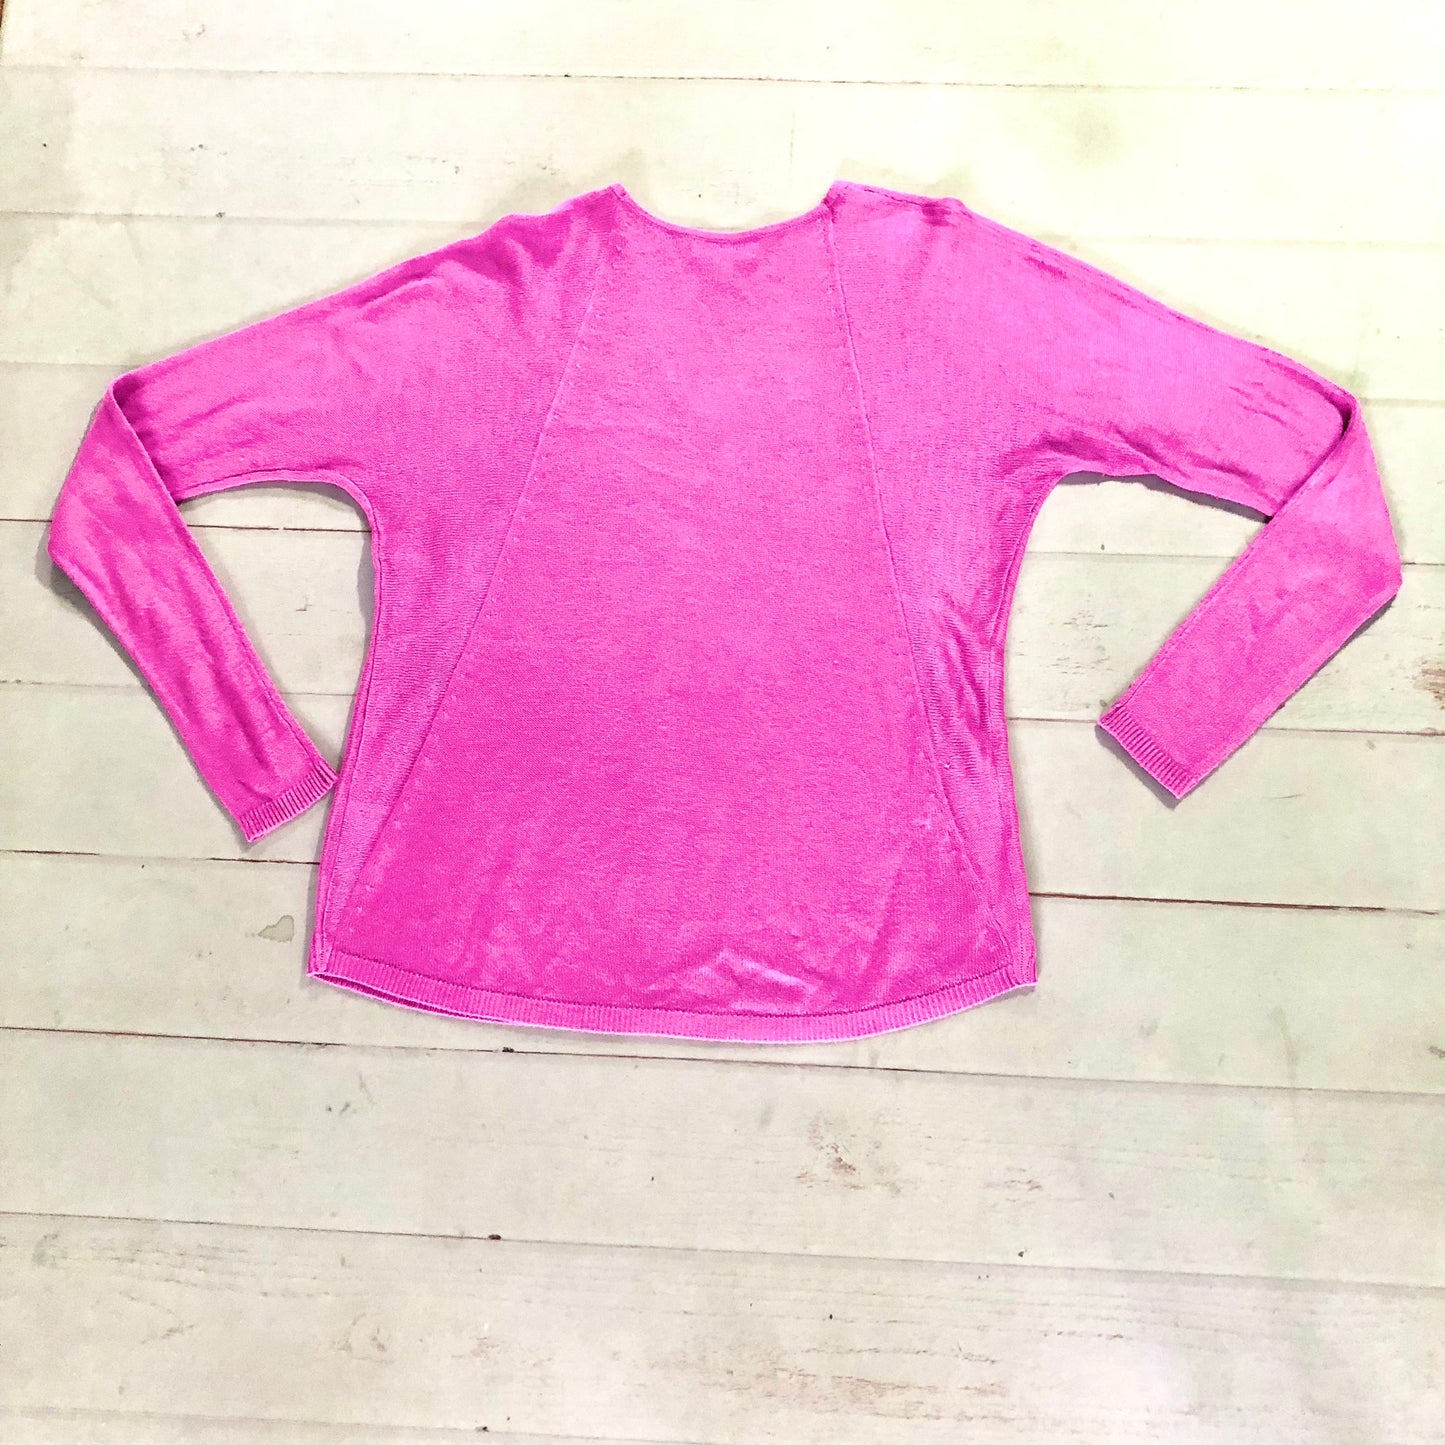 Sweater Designer By Lilly Pulitzer  Size: S